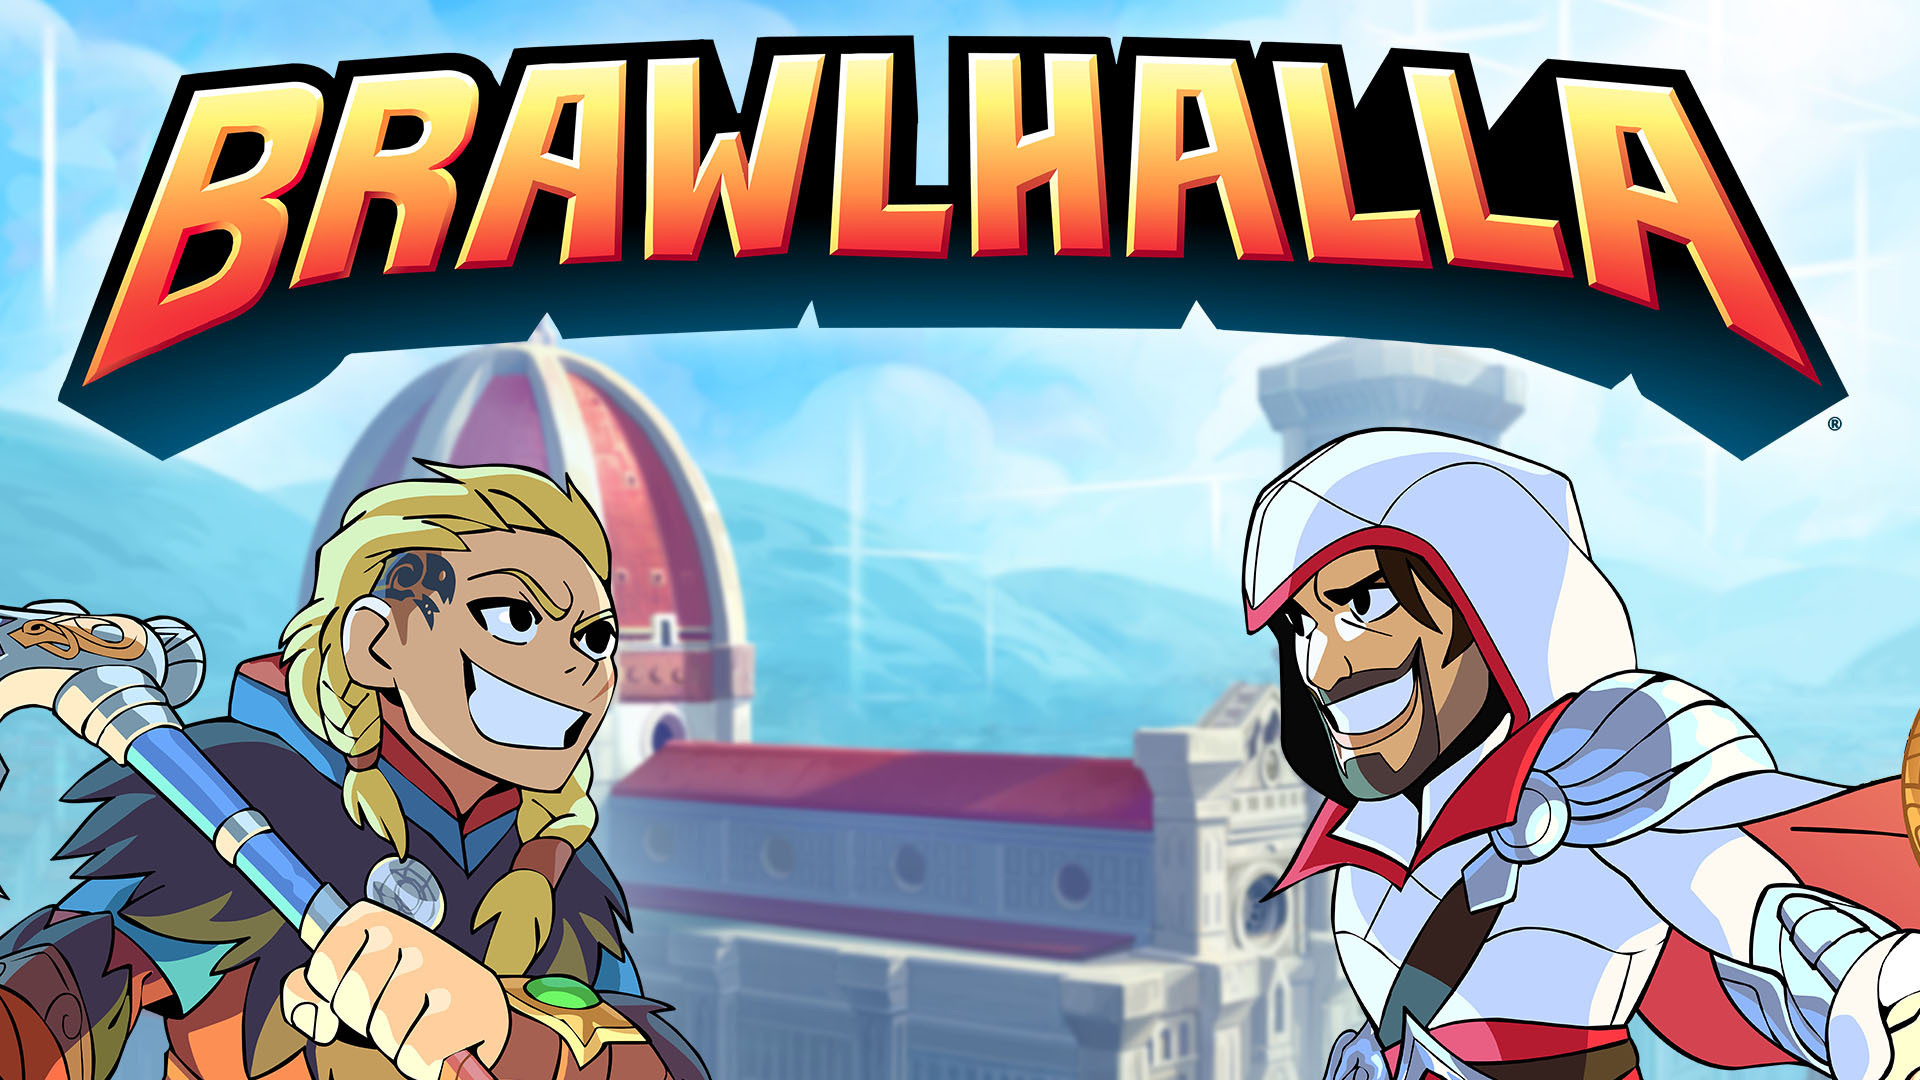 New Legend Ezio, the Master Assassin, Joins Brawlhalla on July 27th